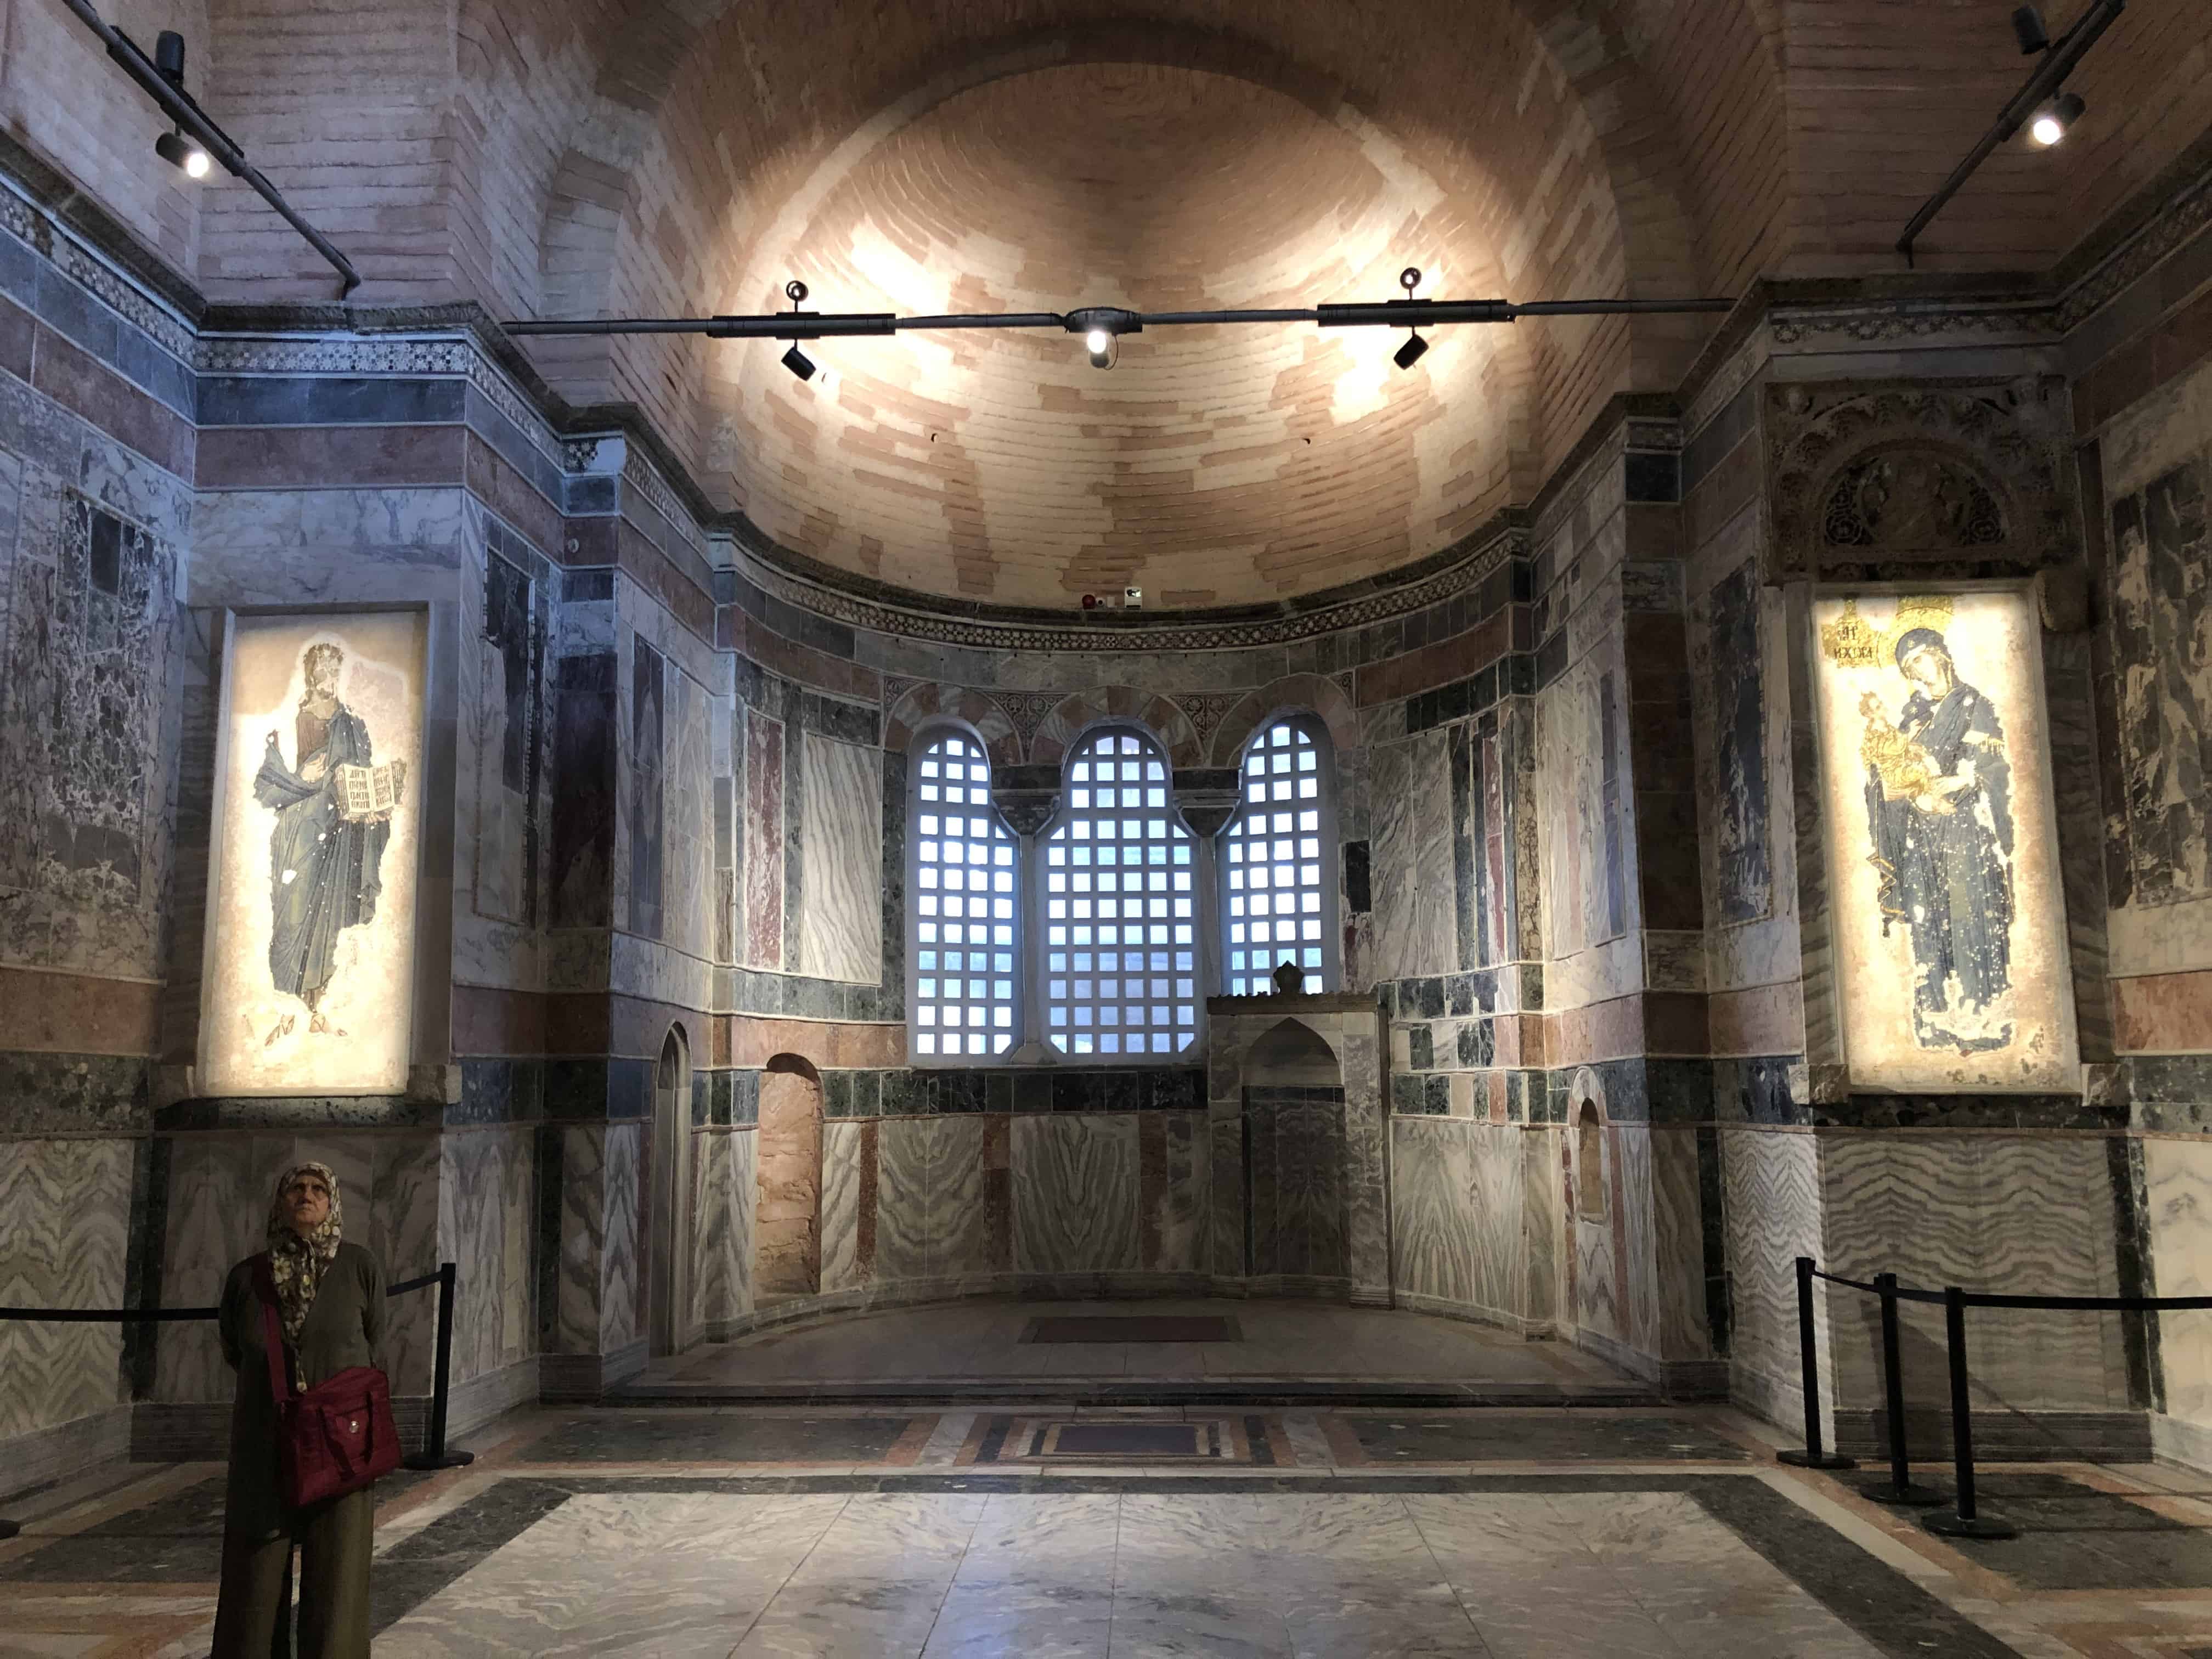 Looking towards the apse at Chora Church in Istanbul, Turkey